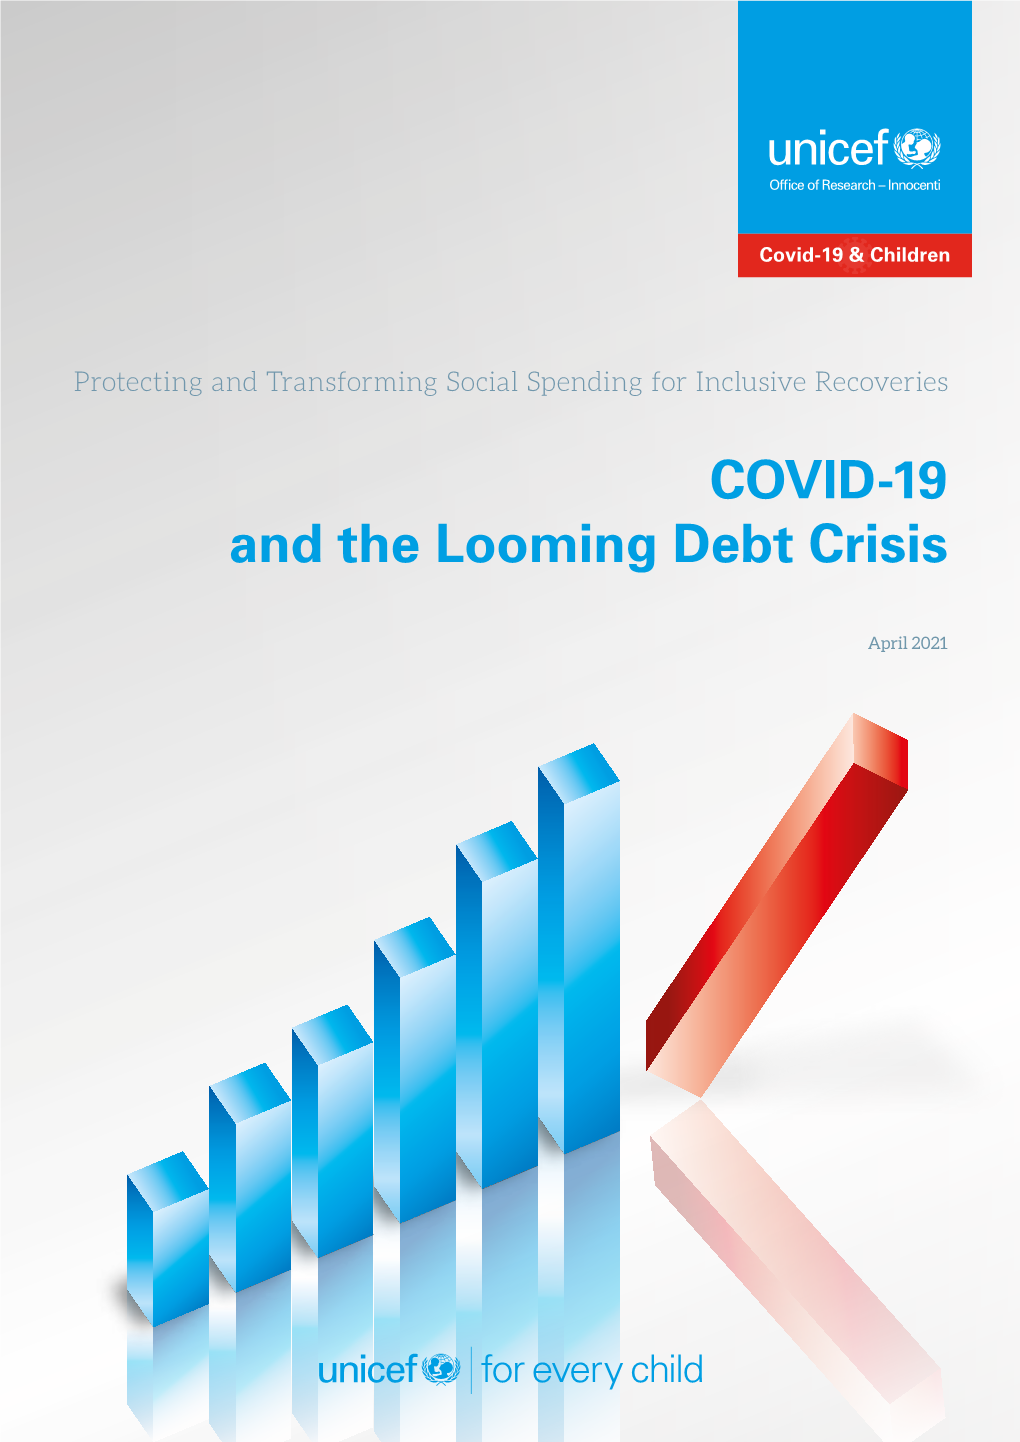 COVID-19 and the Looming Debt Crisis